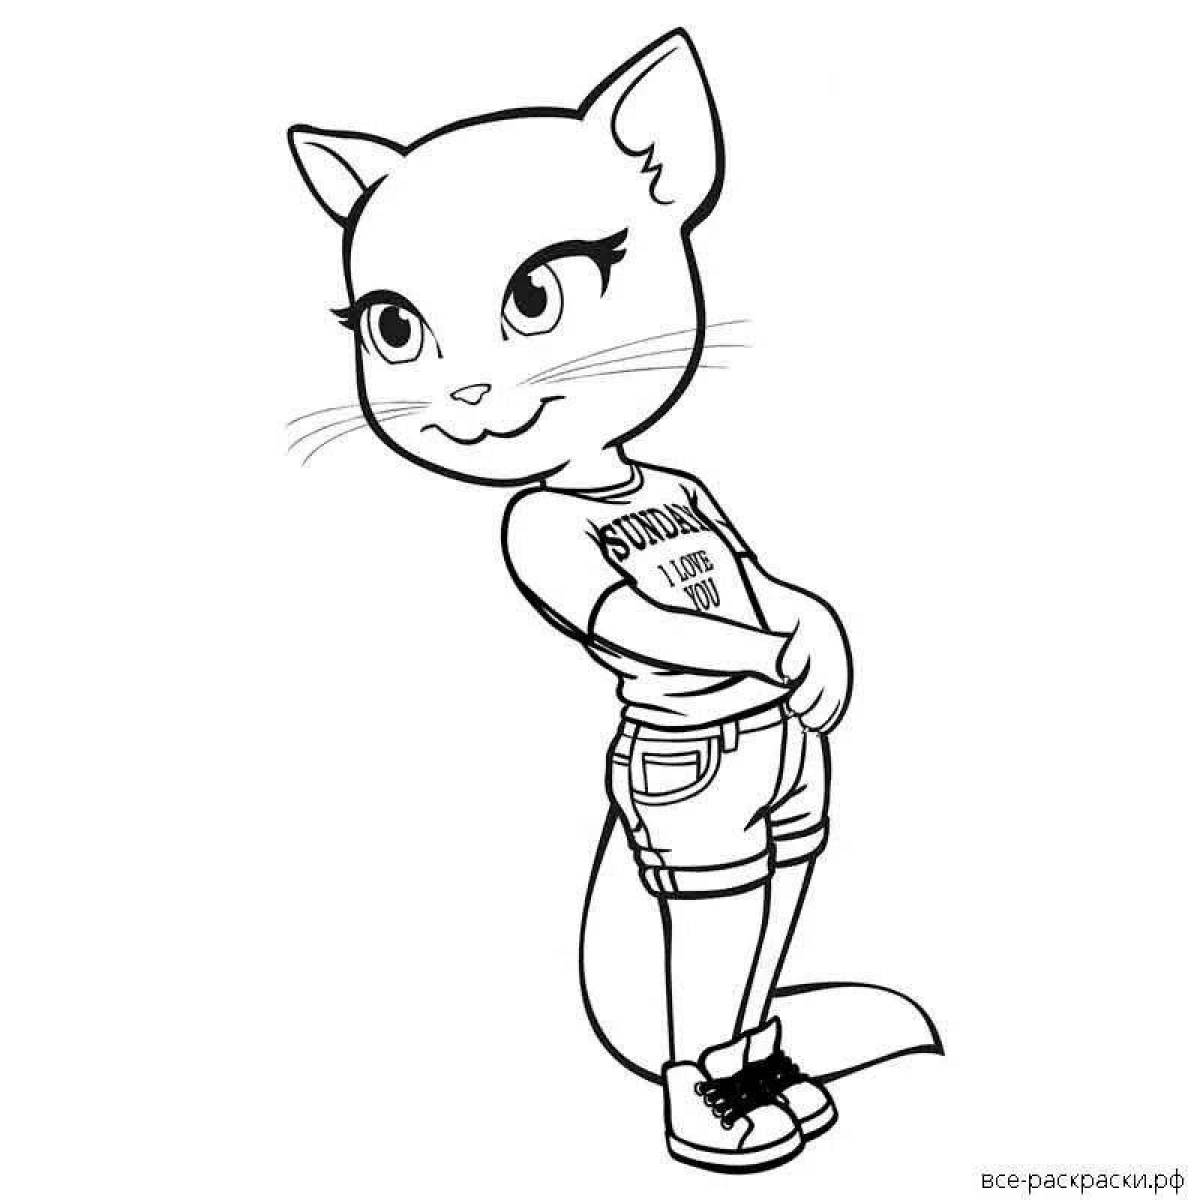 Glorious tom and angela coloring pages